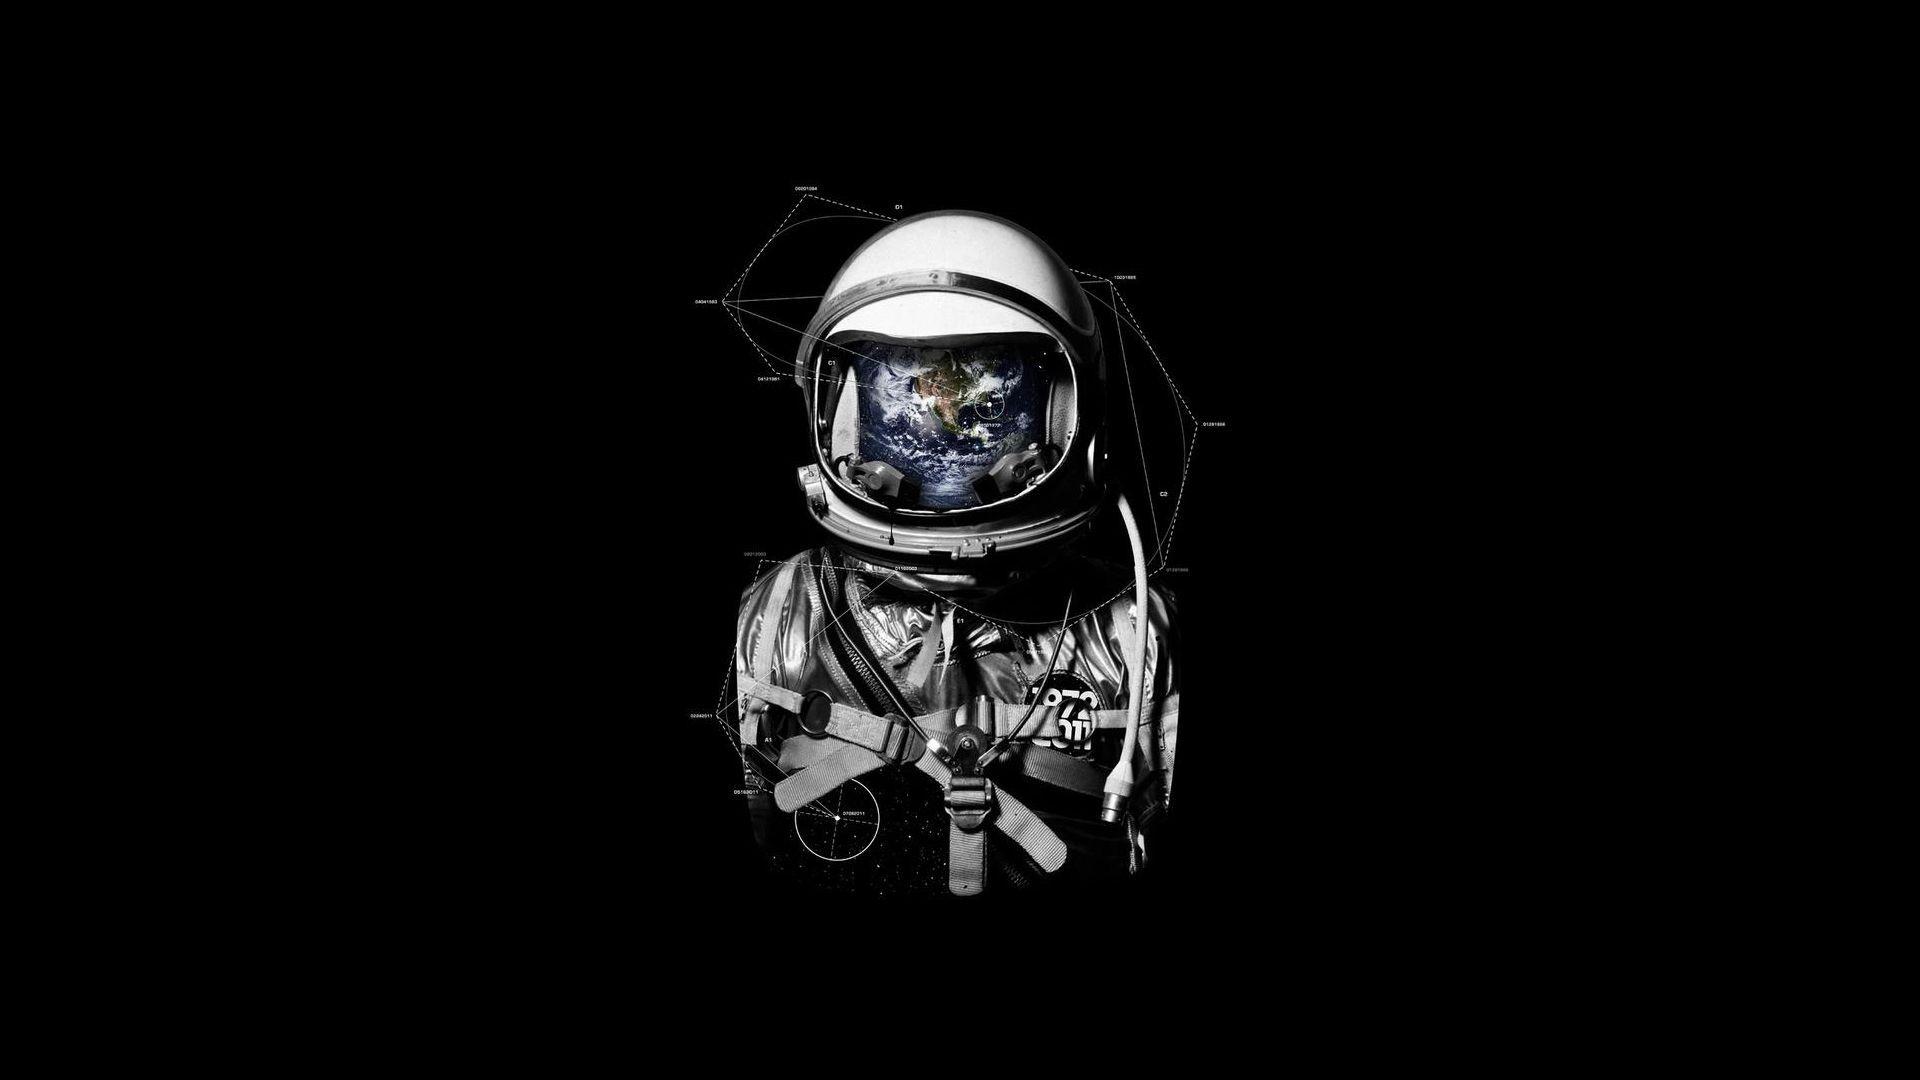 An astronaut with the Earth as a backdrop - Astronaut